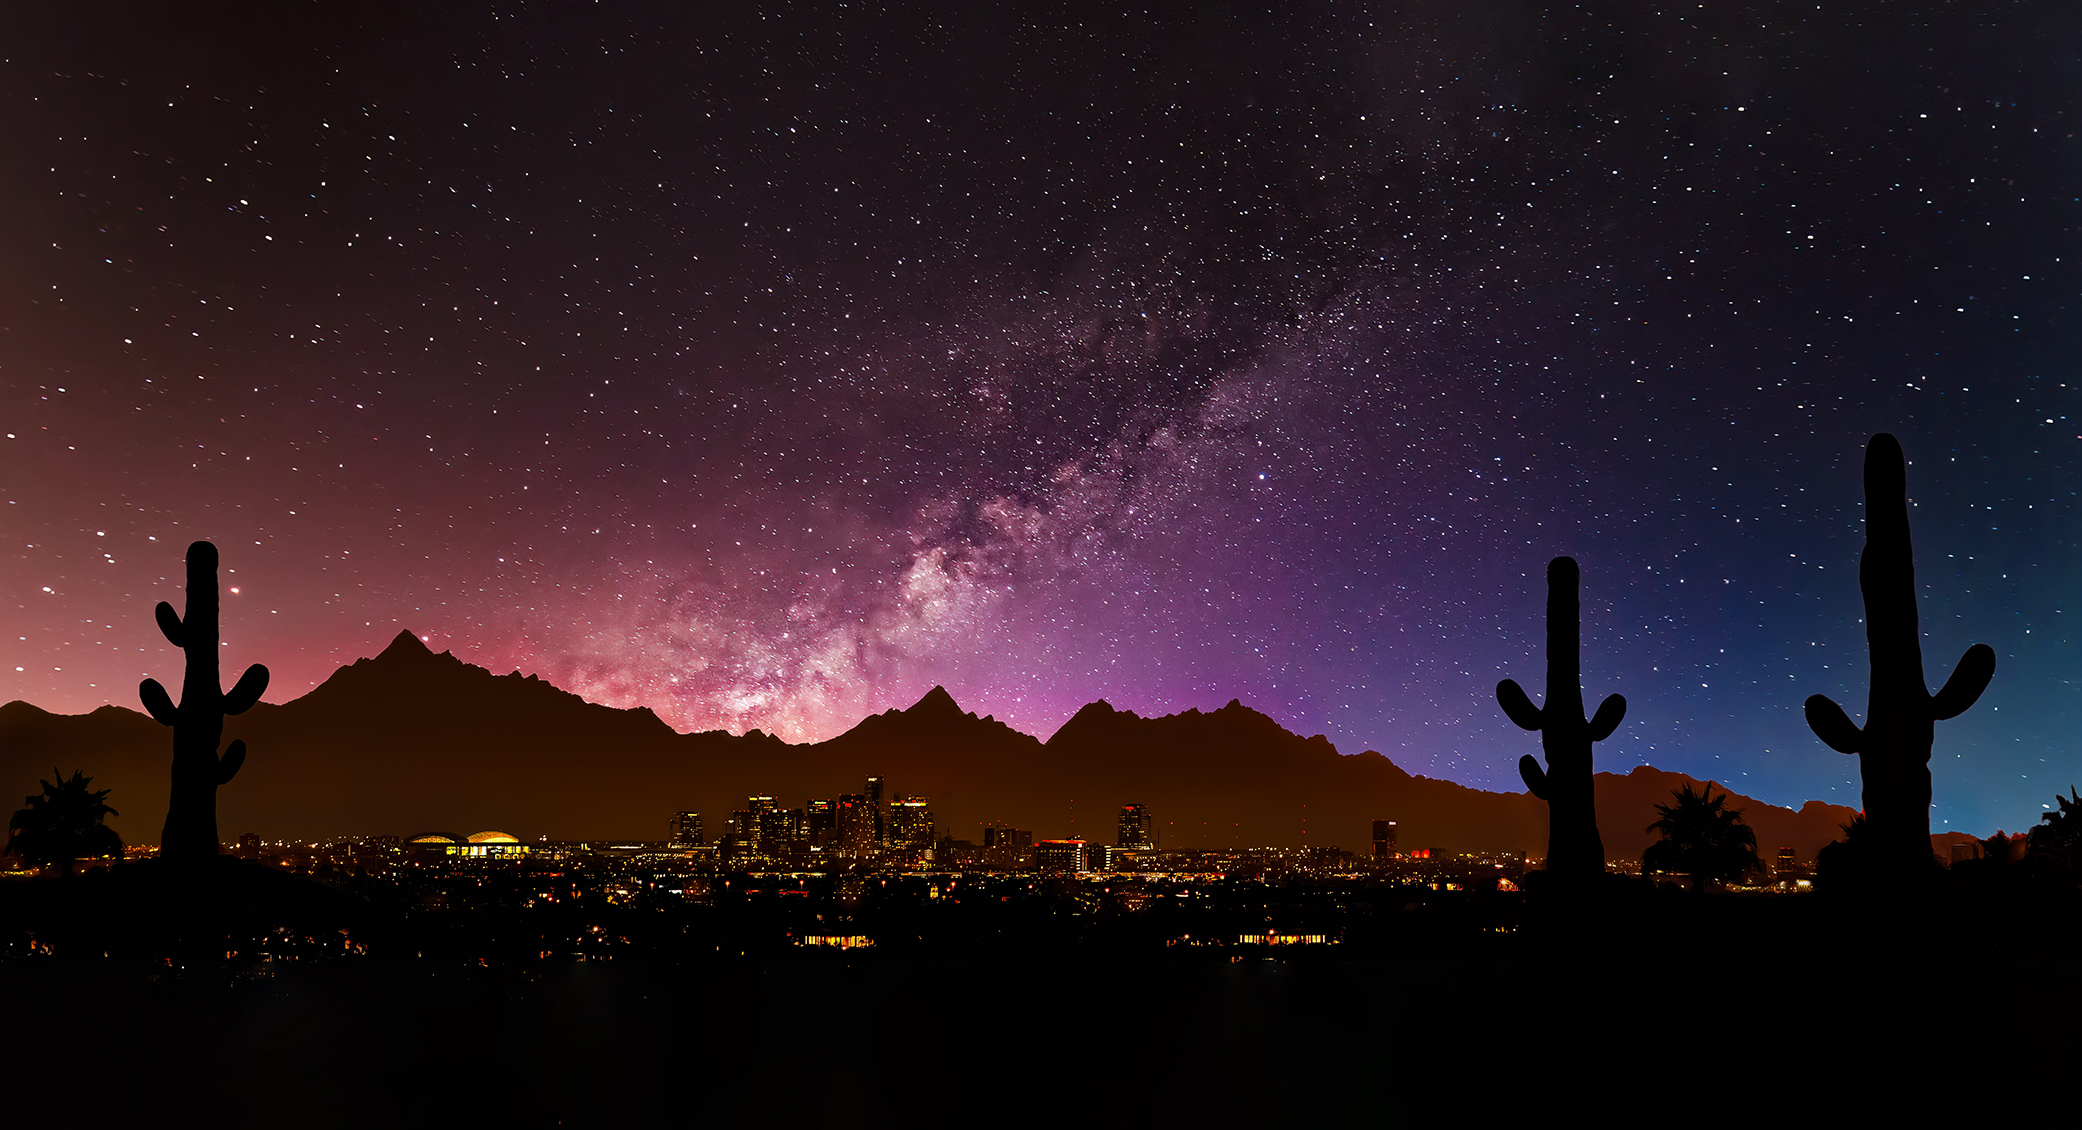 Starry sky over cityscape with cacti silhouettes in foreground.